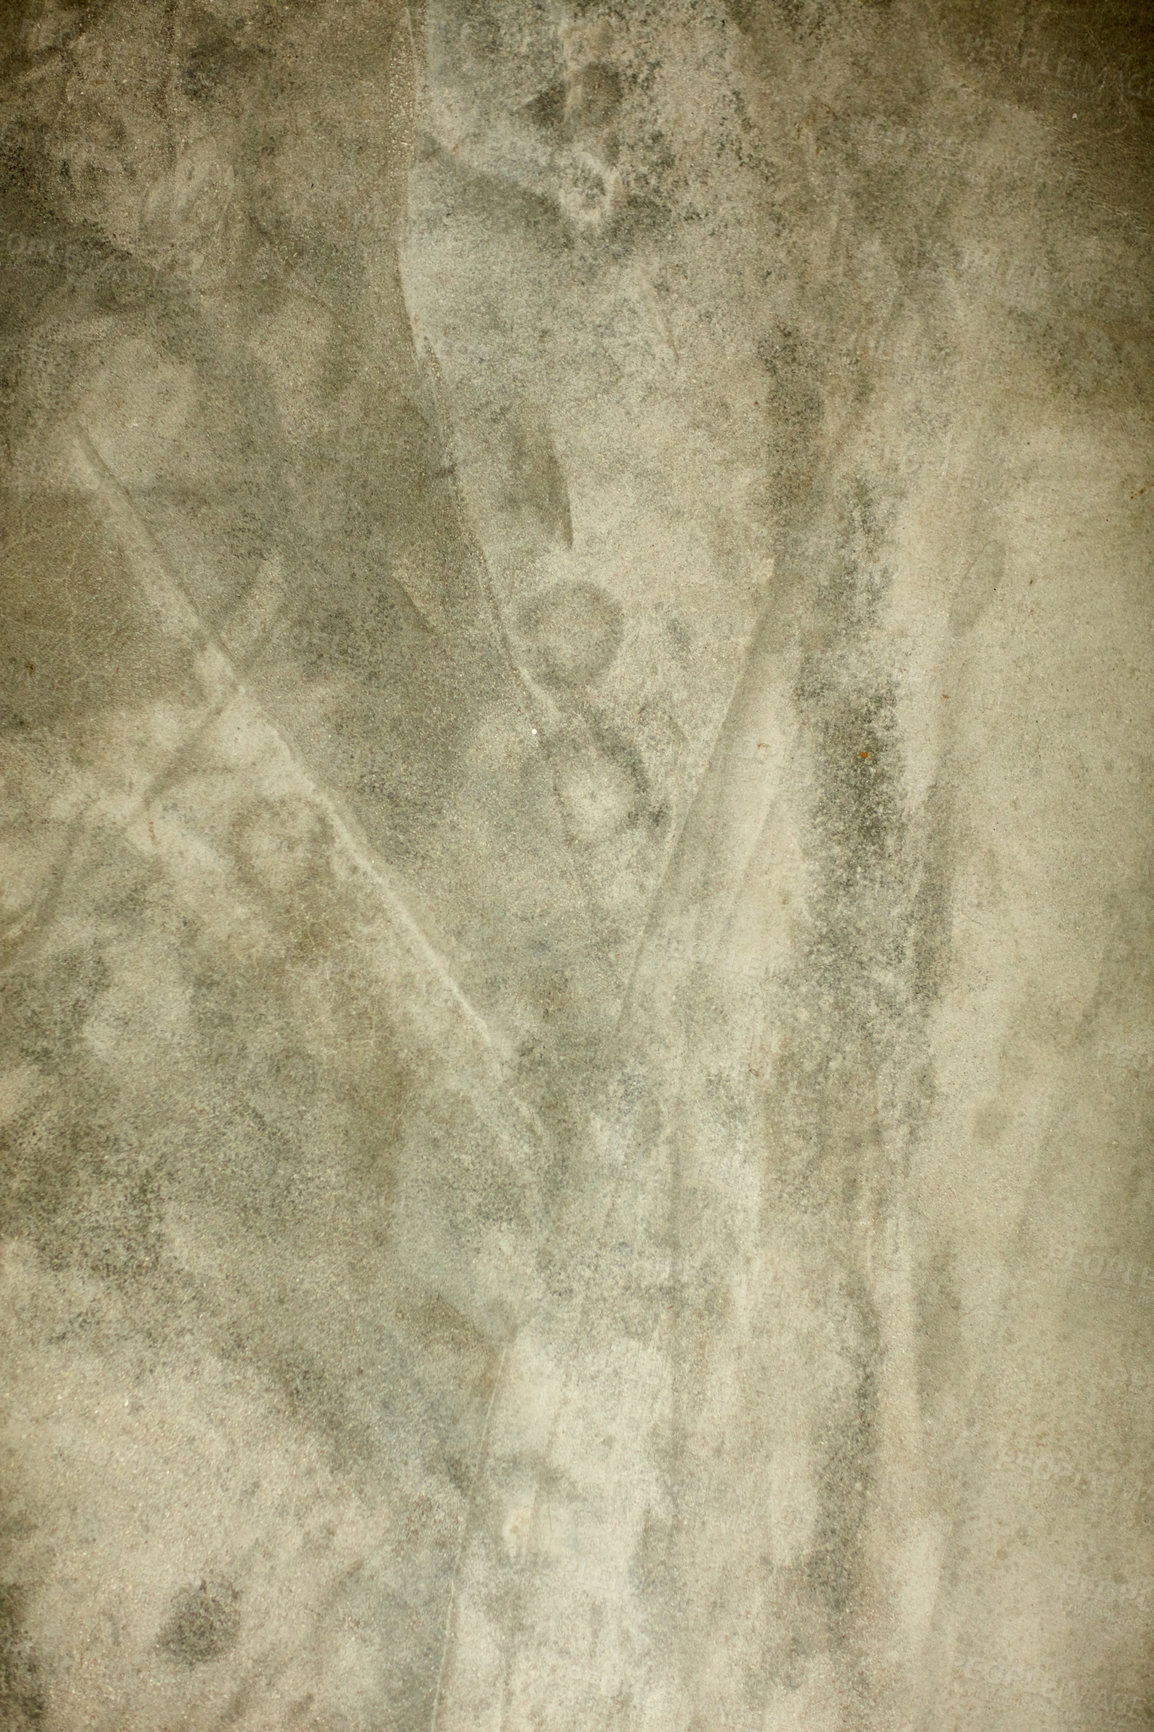 Buy stock photo High angle shot of a weathered concrete floor